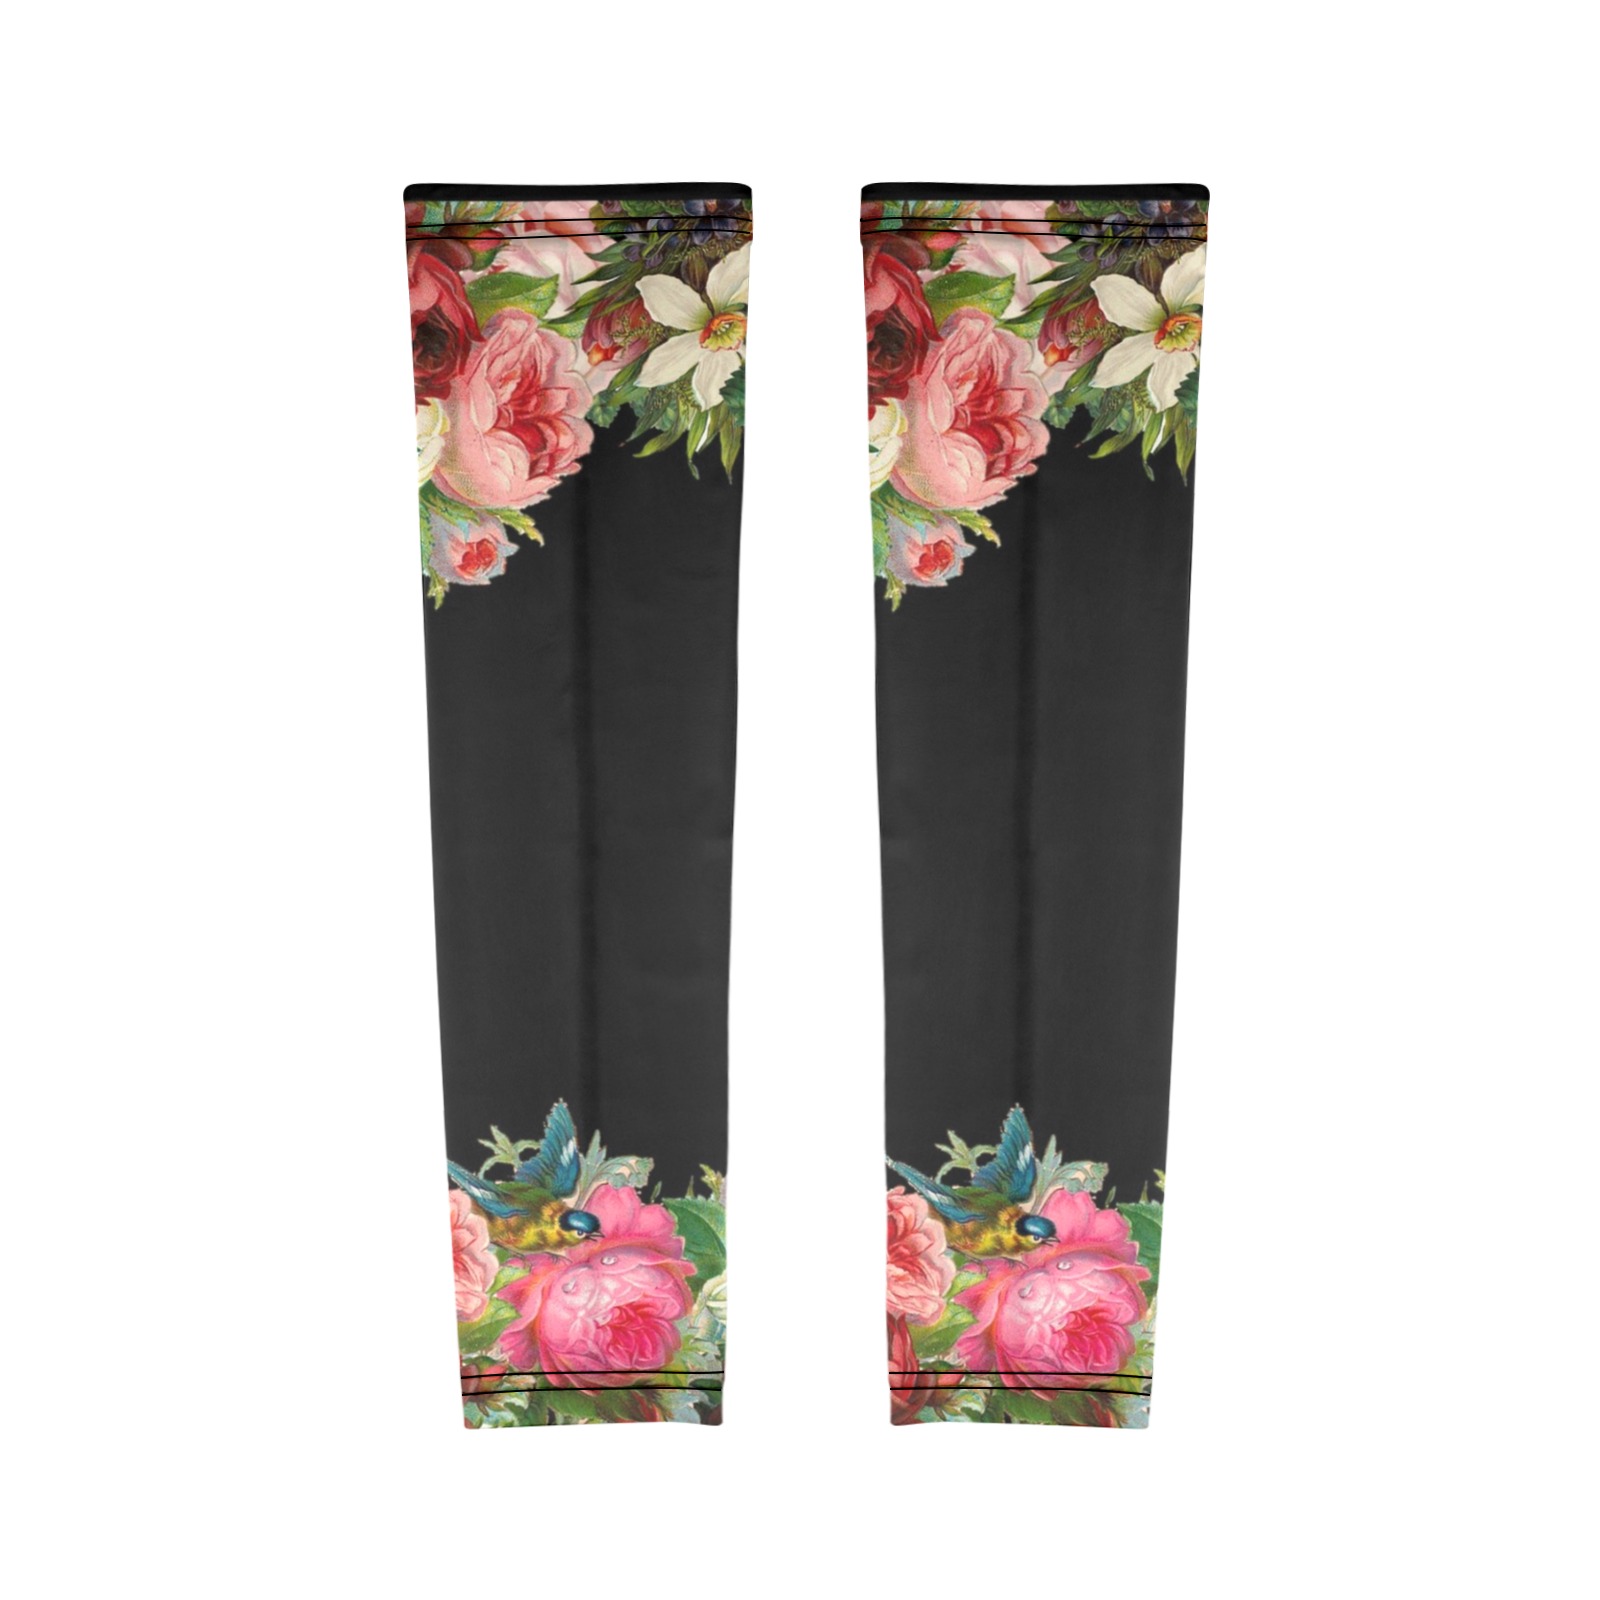 Vintage Roses Arm Sleeves (Set of Two with Different Printings)